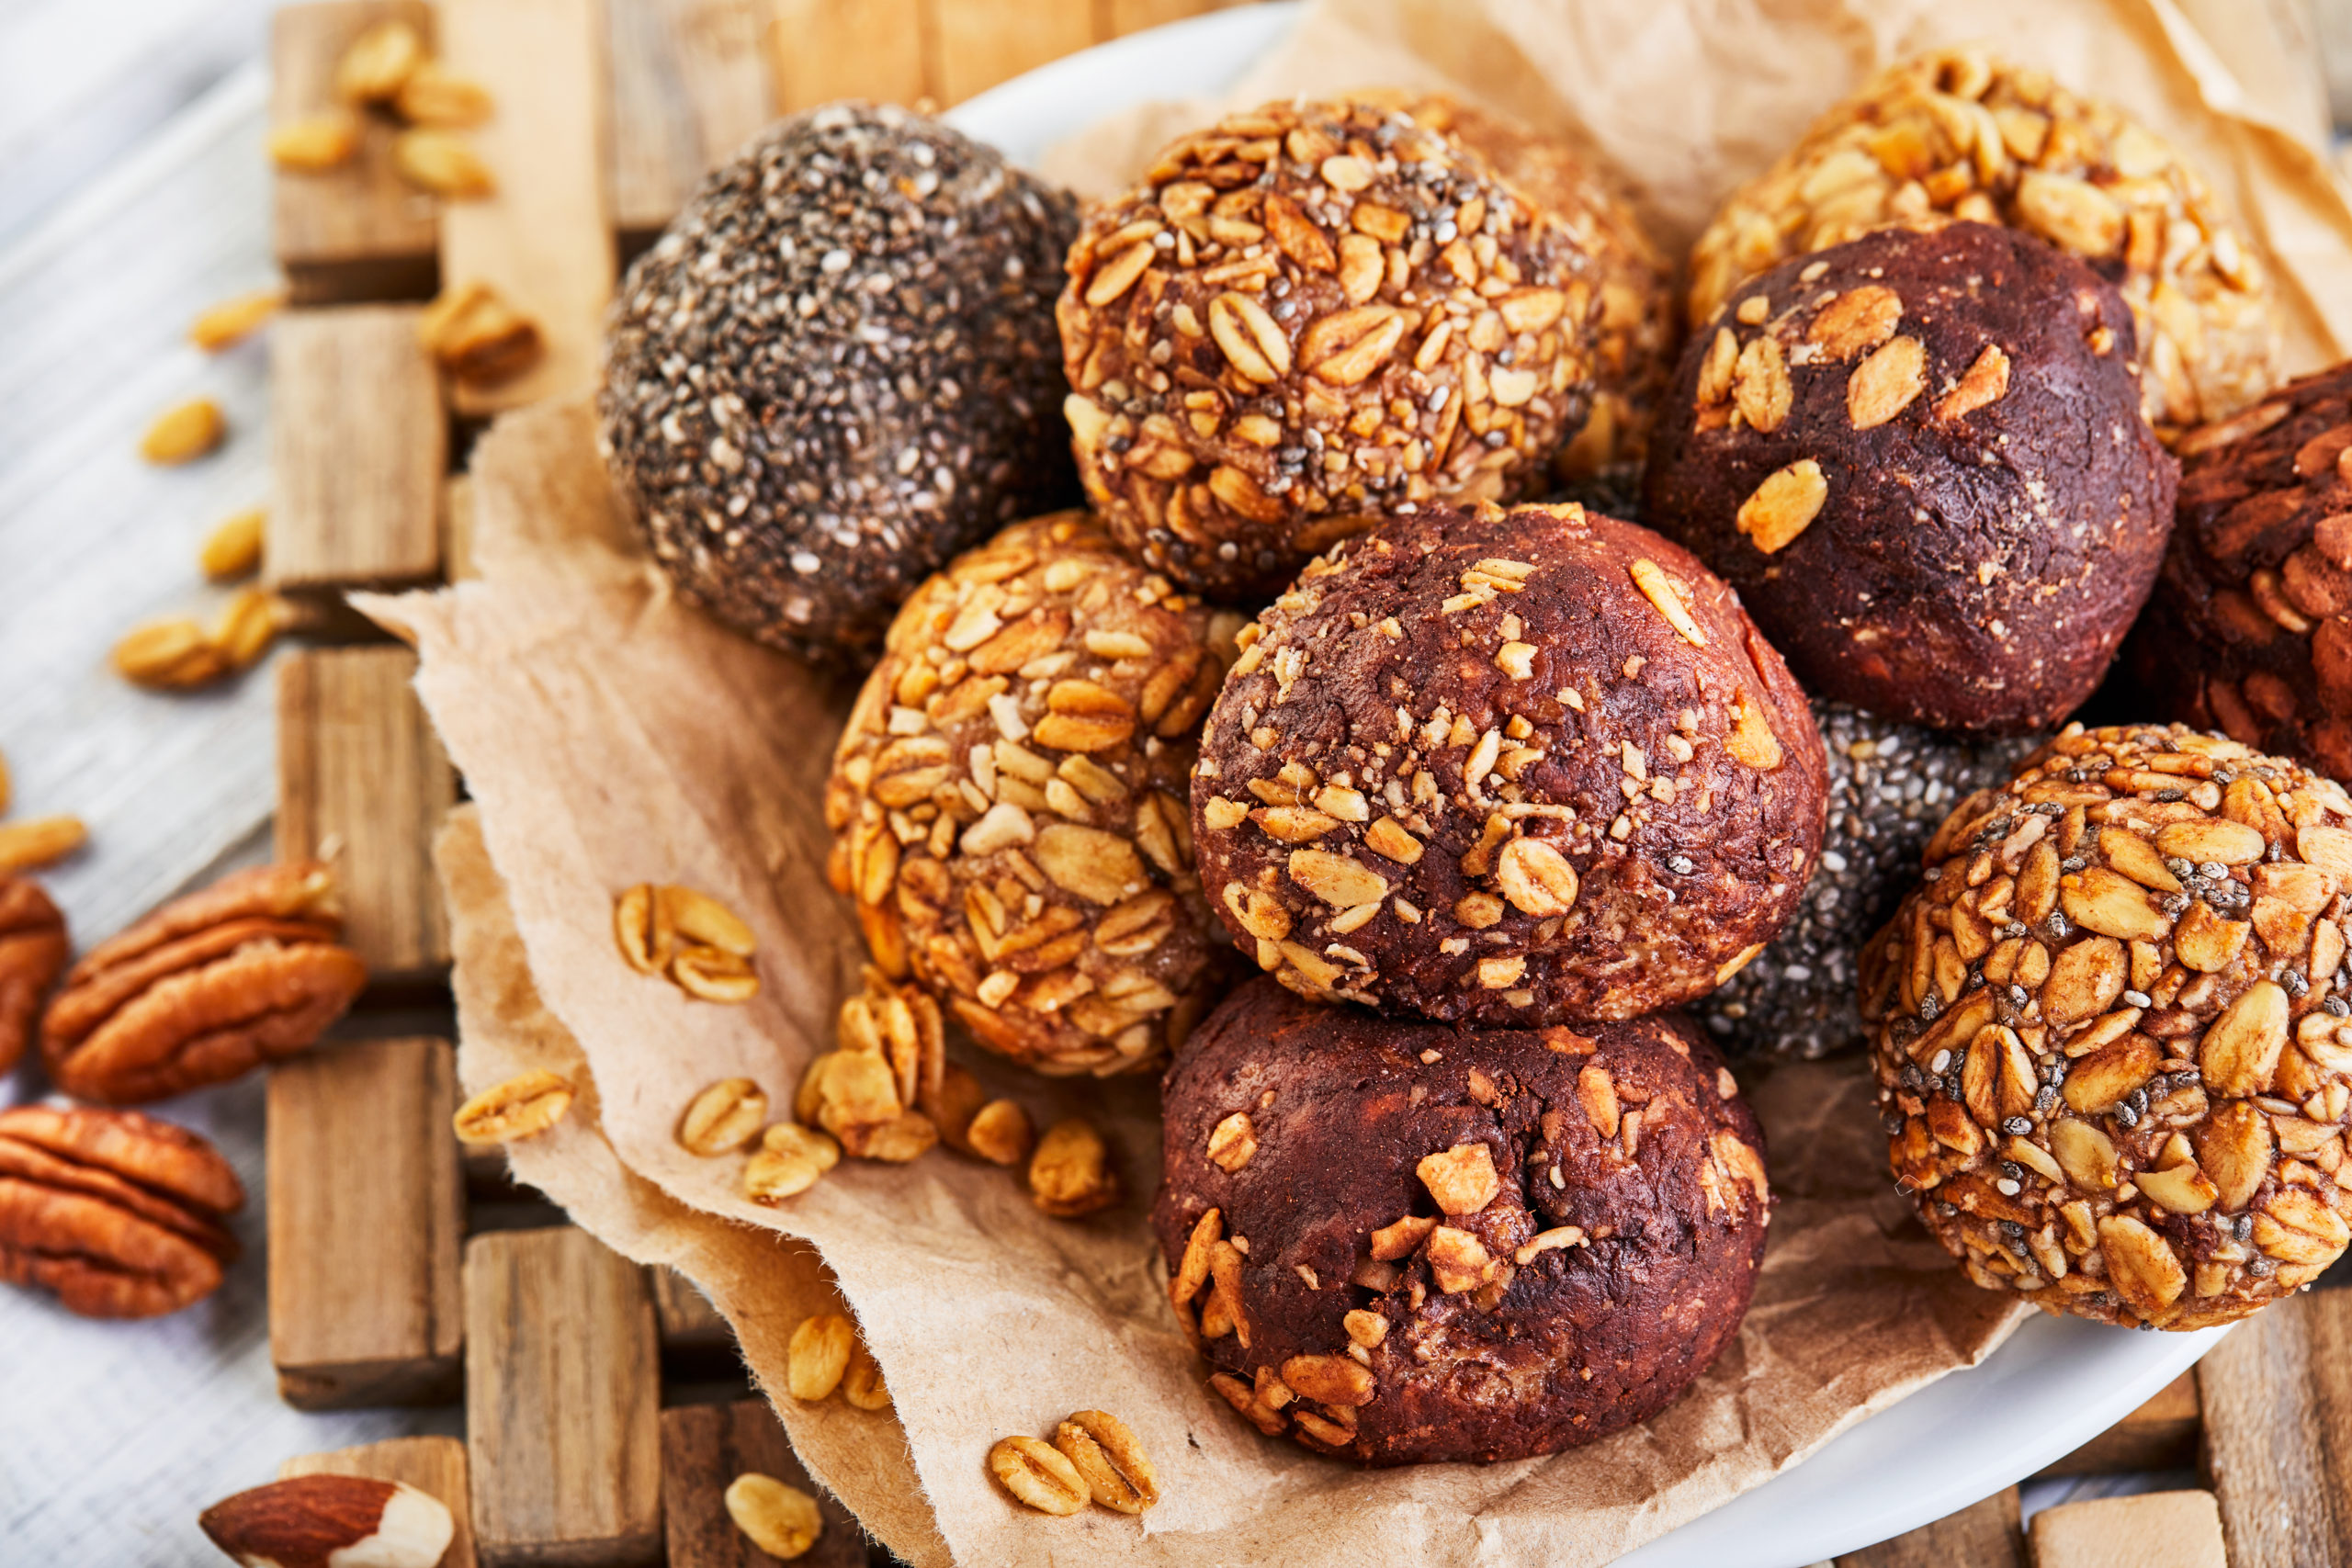 Healthy Organic Energy balls Muesli Bites with Nuts, Cocoa, Chia and Honey - Vegan Vegetarian Raw Snacks or Food. copy space. Close-up.